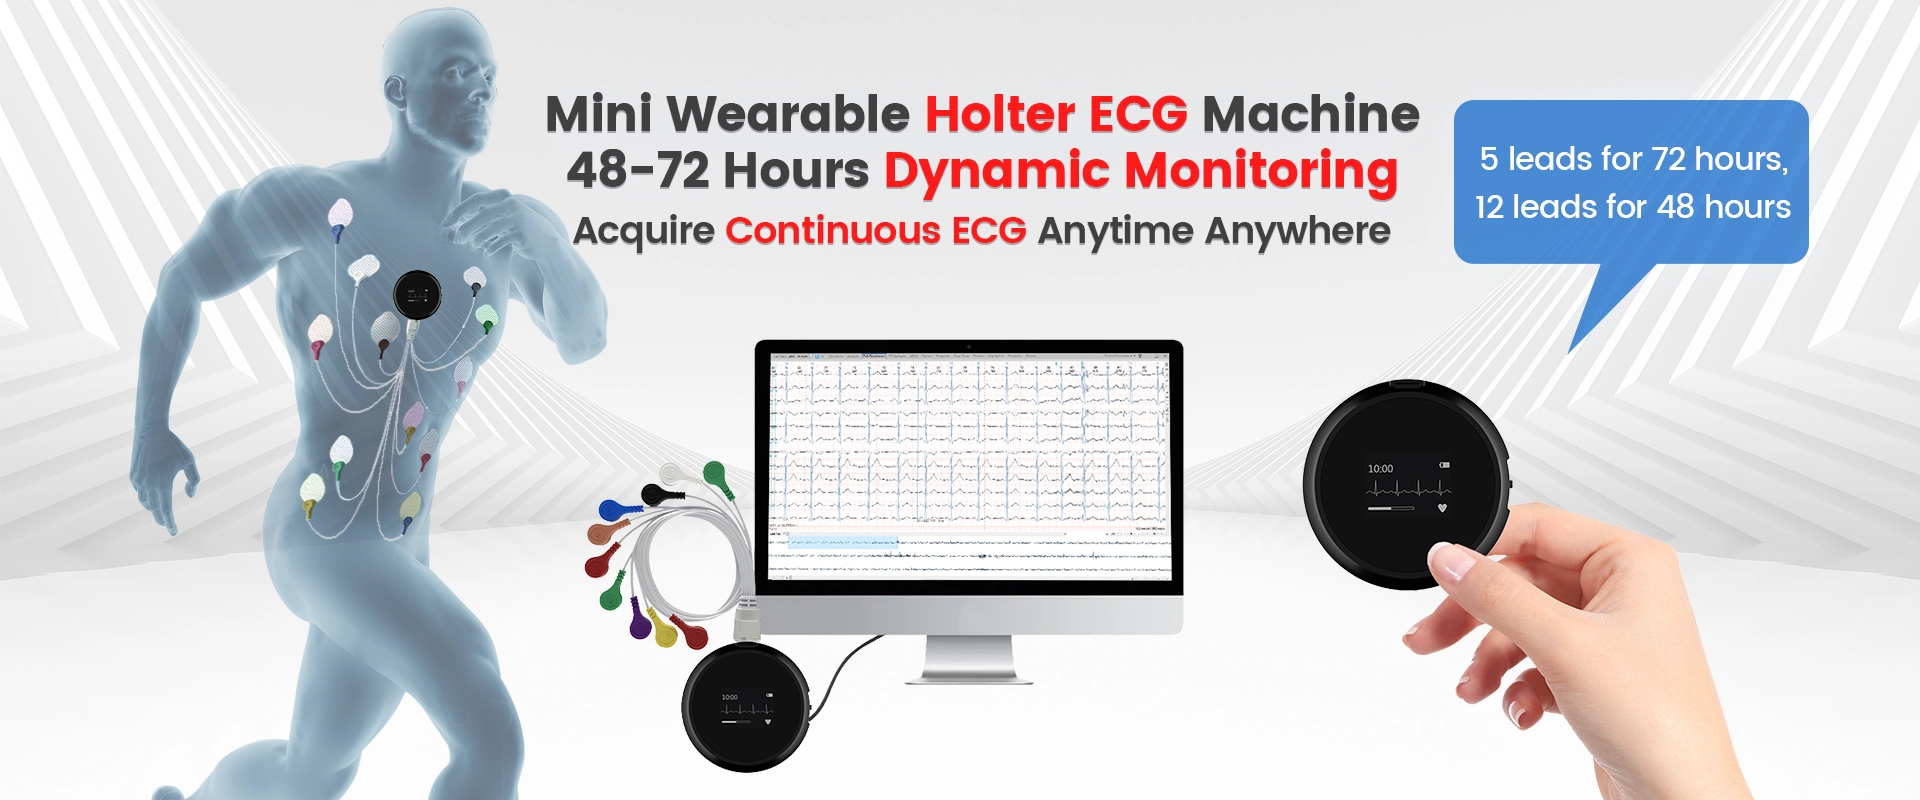 Lepu_M12_Medical_Grade_Wearable_Holter_Monitor_3_Channels_with_Complete_Software_72_Hours_Continuous_Monitoring_Dynamic_12_Leads_ECG.jpg